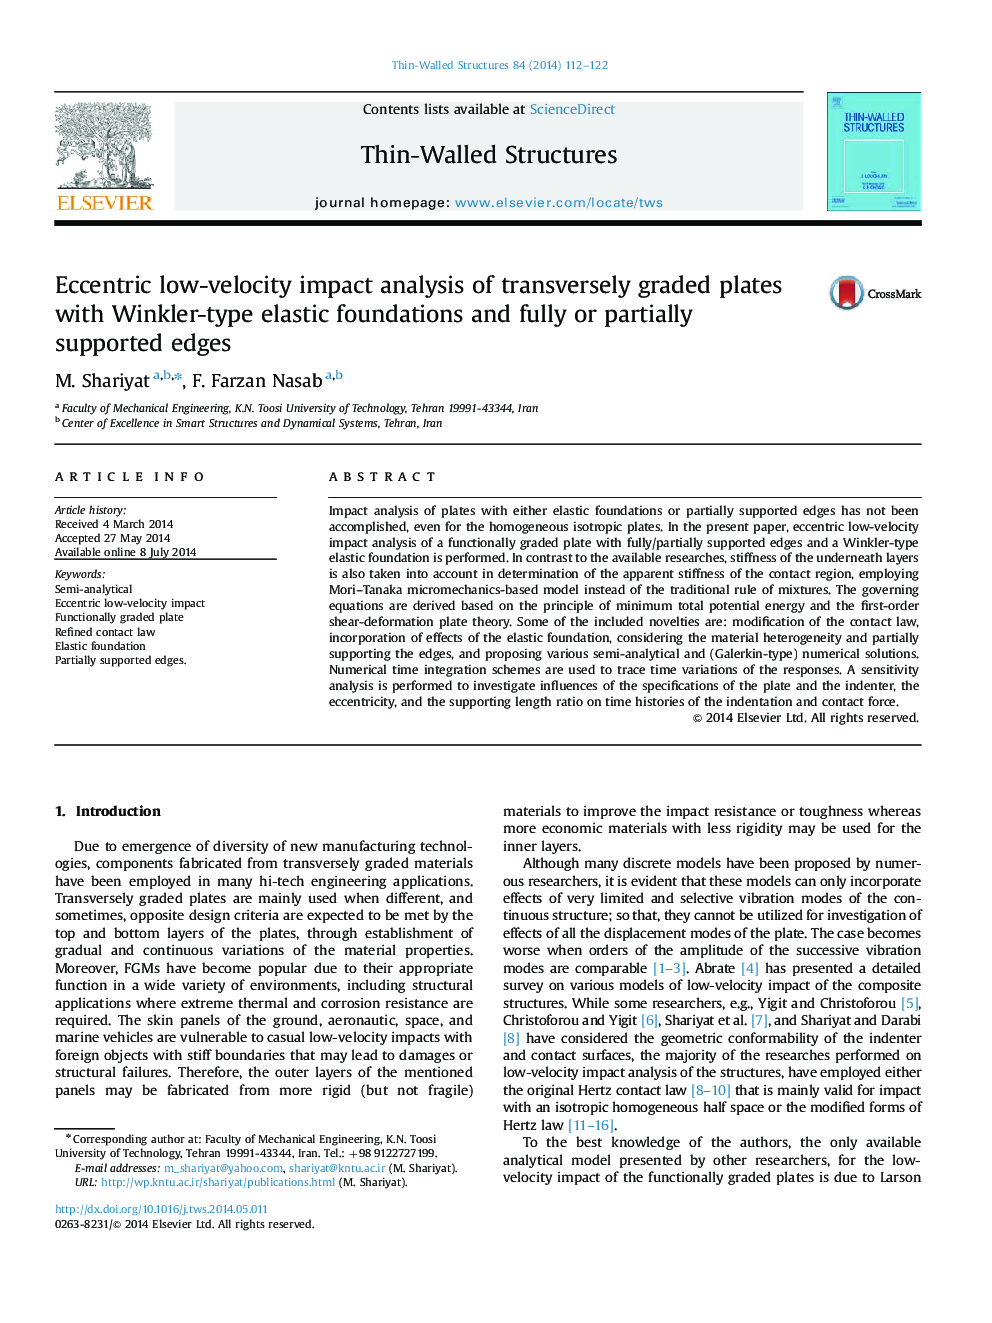 Eccentric low-velocity impact analysis of transversely graded plates with Winkler-type elastic foundations and fully or partially supported edges